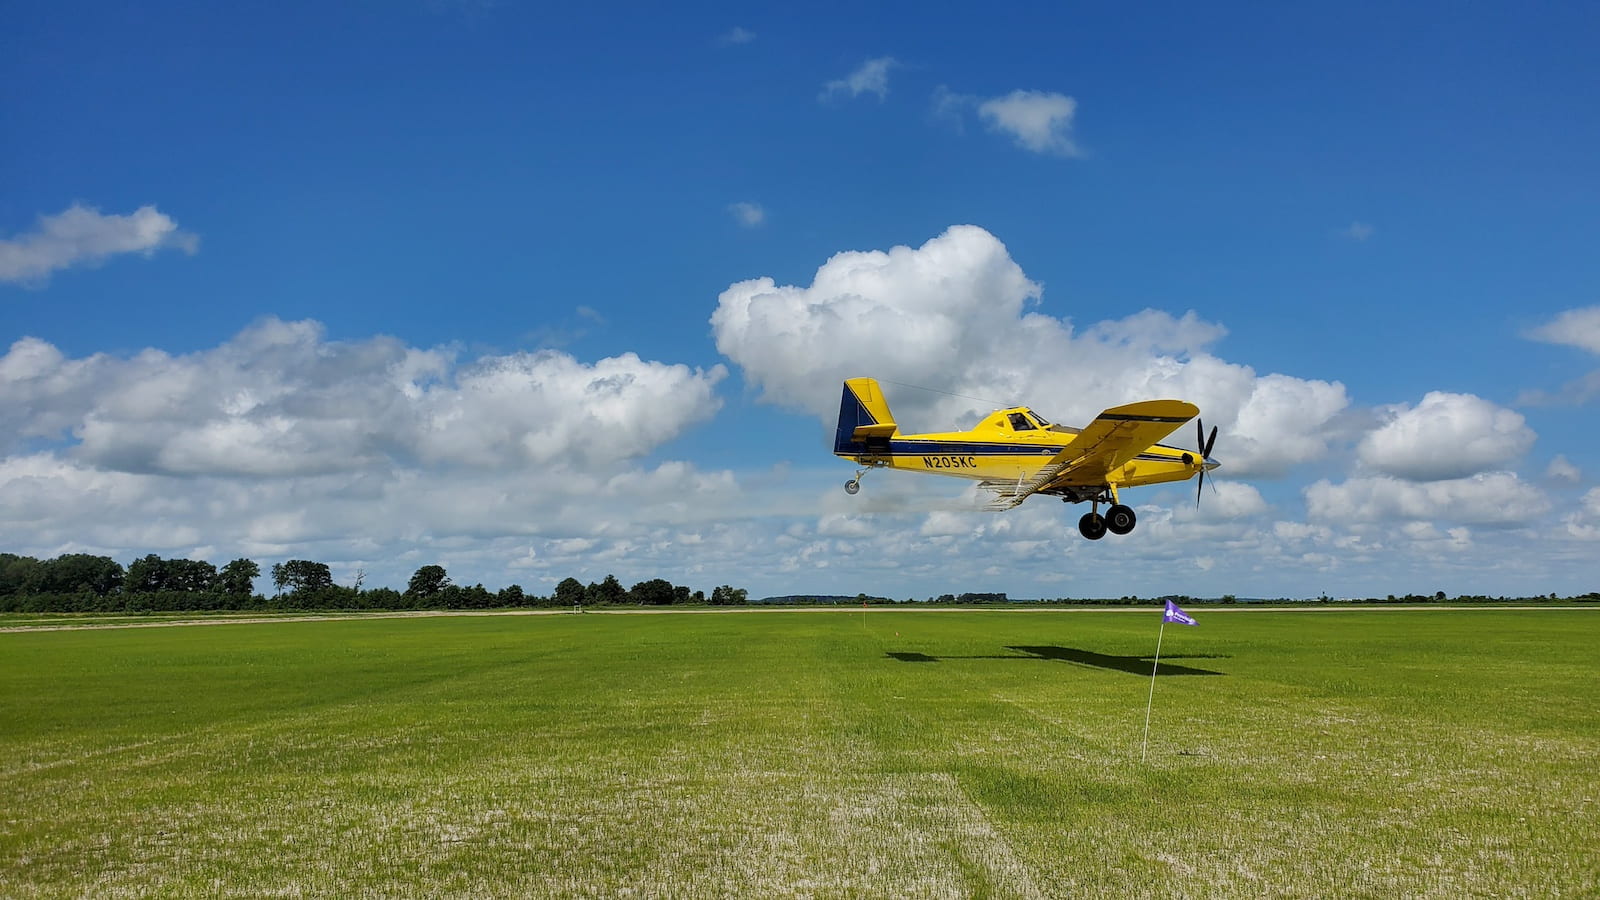 Herbicide Drift Study Provides New Recommendations for Aerial